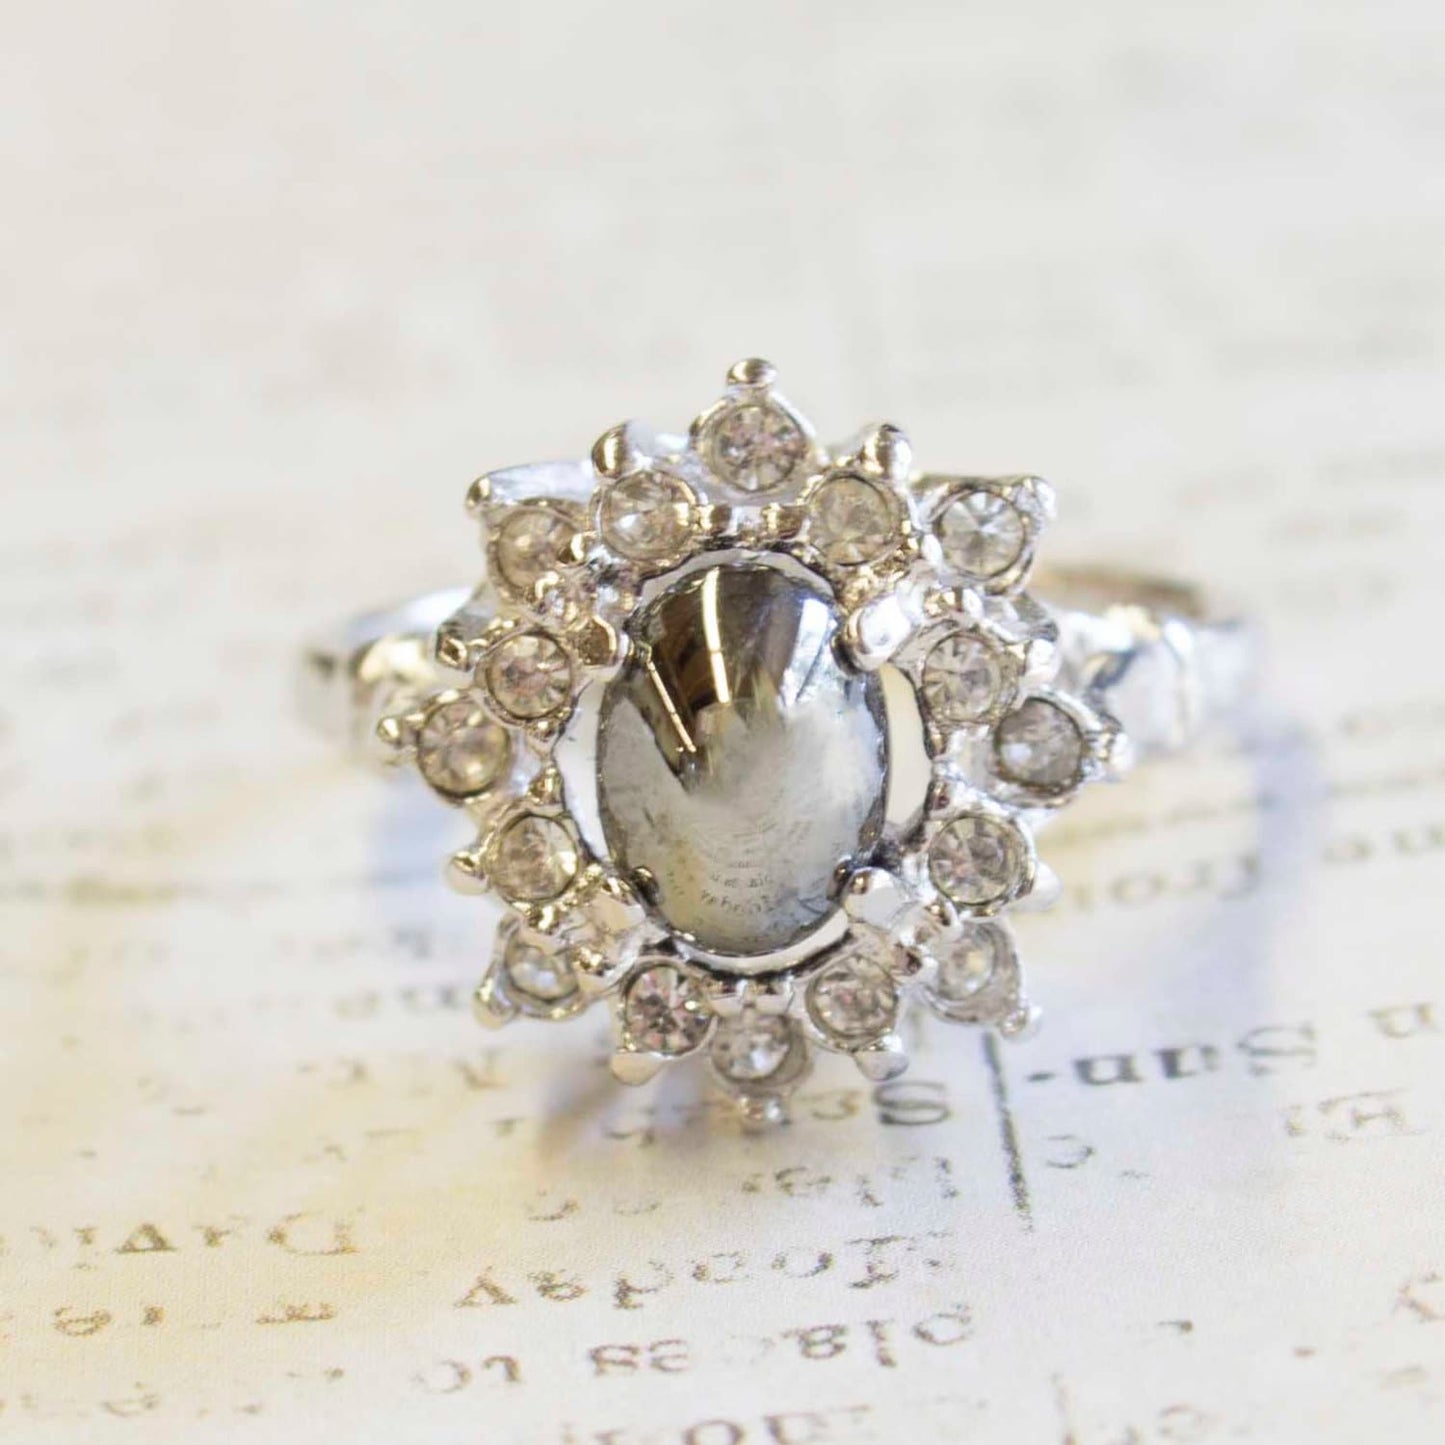 Vintage Ring Genuine Jade with Swarovski Crystals 18k White Gold Cocktail Ring Antique Womans Jewelry #R174